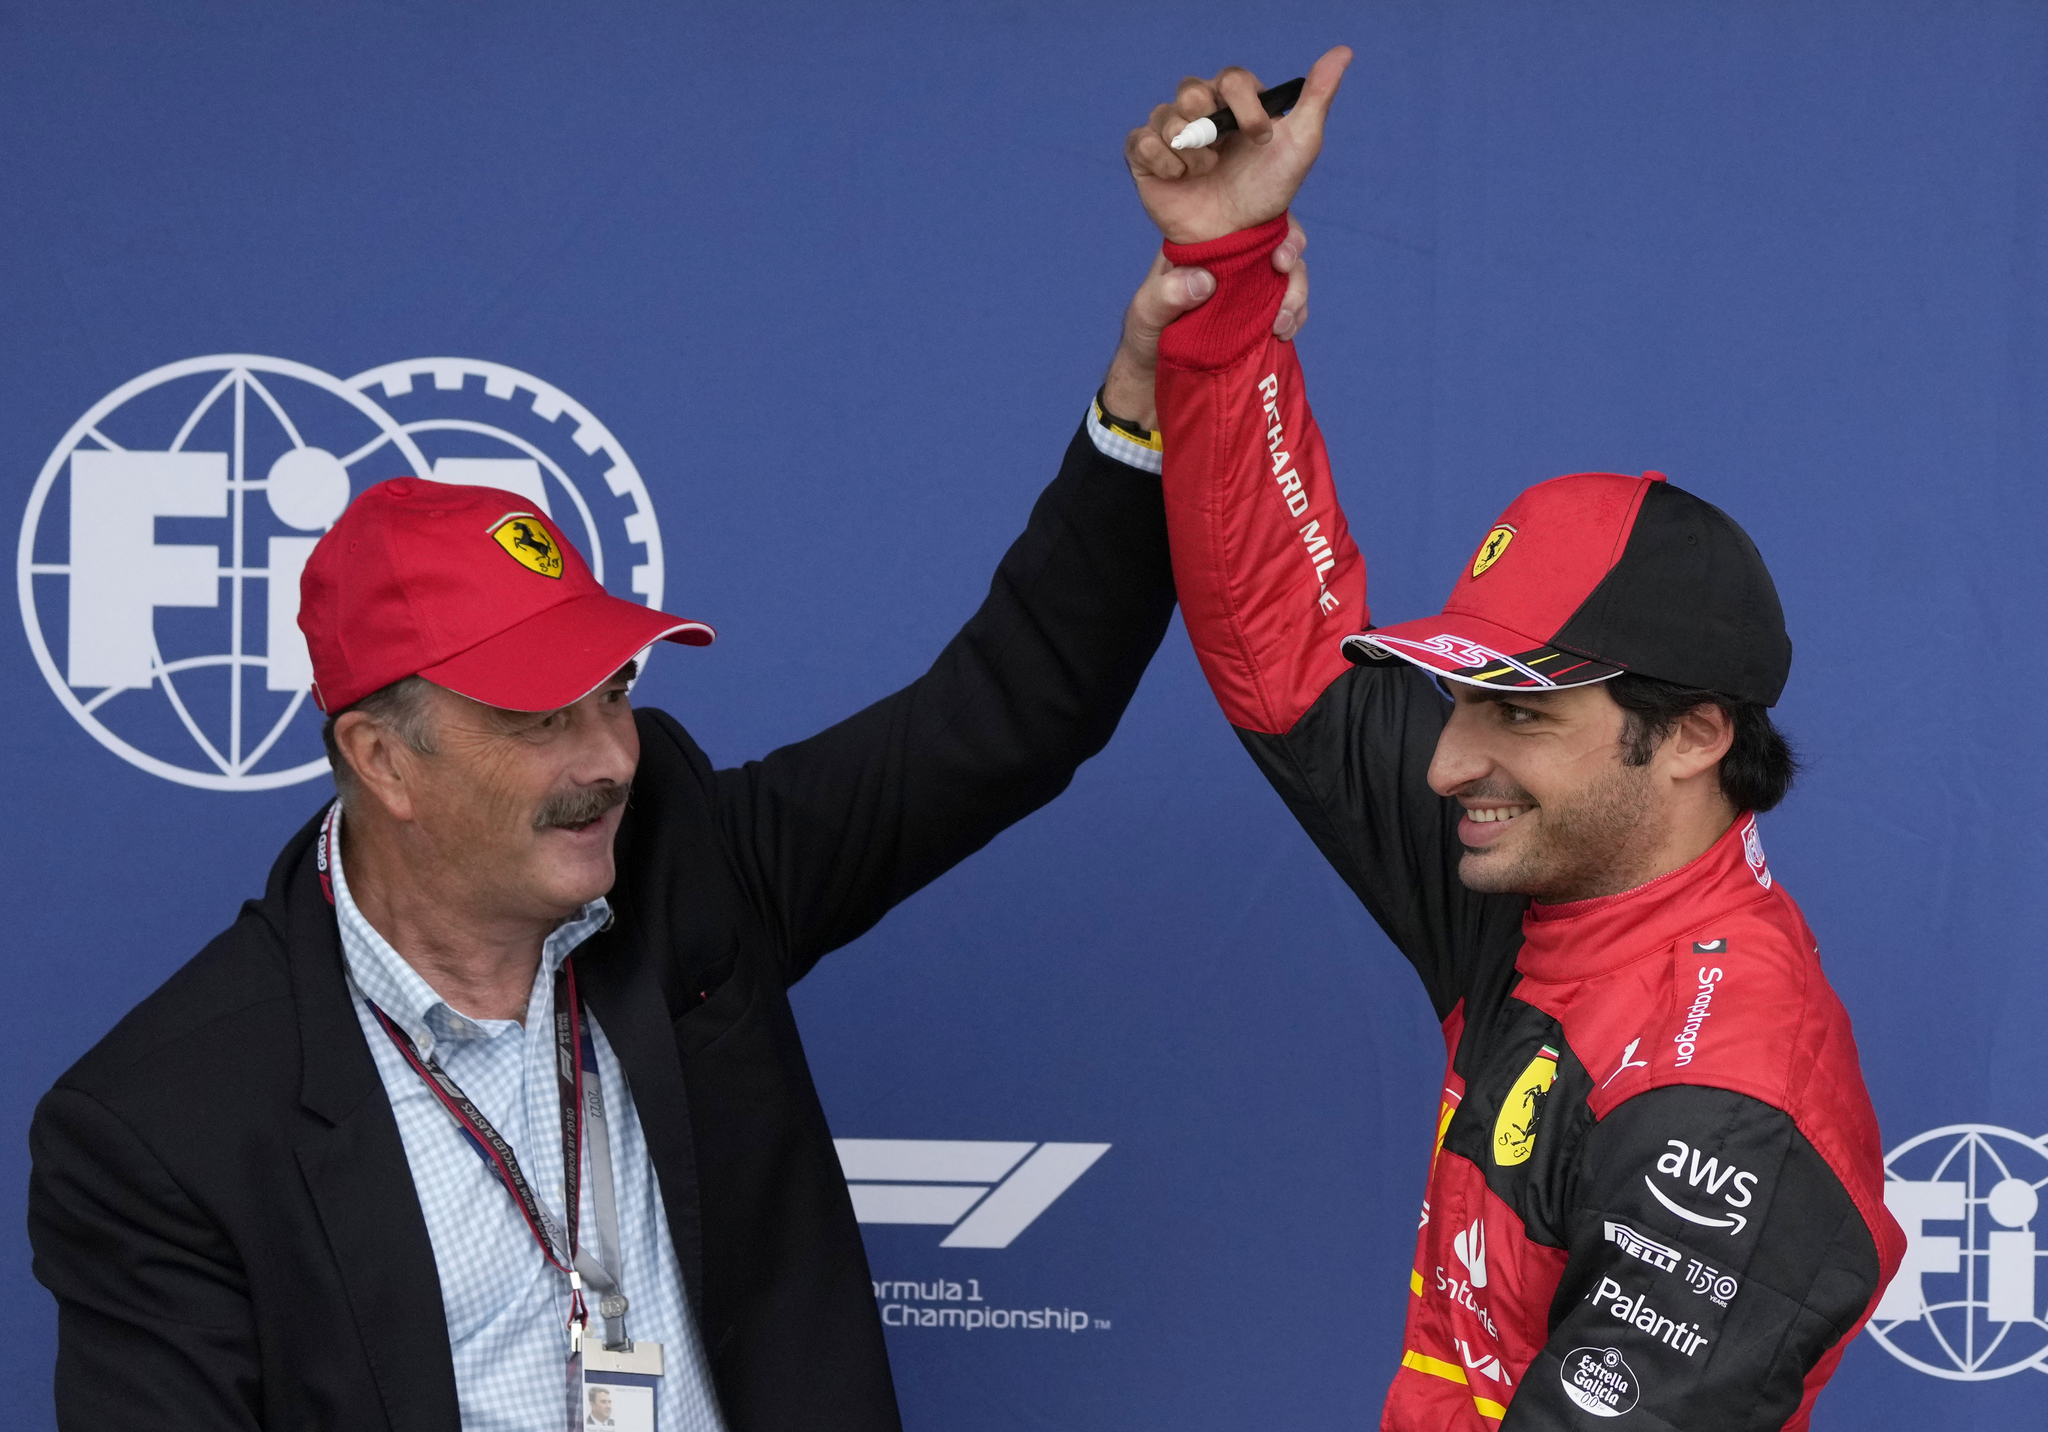 Ferrari driver lt;HIT gt;Carlos lt;/HIT gt; lt;HIT gt;Sainz lt;/HIT gt; of Spain, right, poses with former British driver Nigel Mansell after he clocked the fastest time during the qualifying session for the British Formula One Grand Prix at the Silverstone circuit, in Silverstone, England, Saturday, July 2, 2022. The British F1 Grand Prix is held on Sunday July 3, 2022. (AP Photo/Matt Dunham)